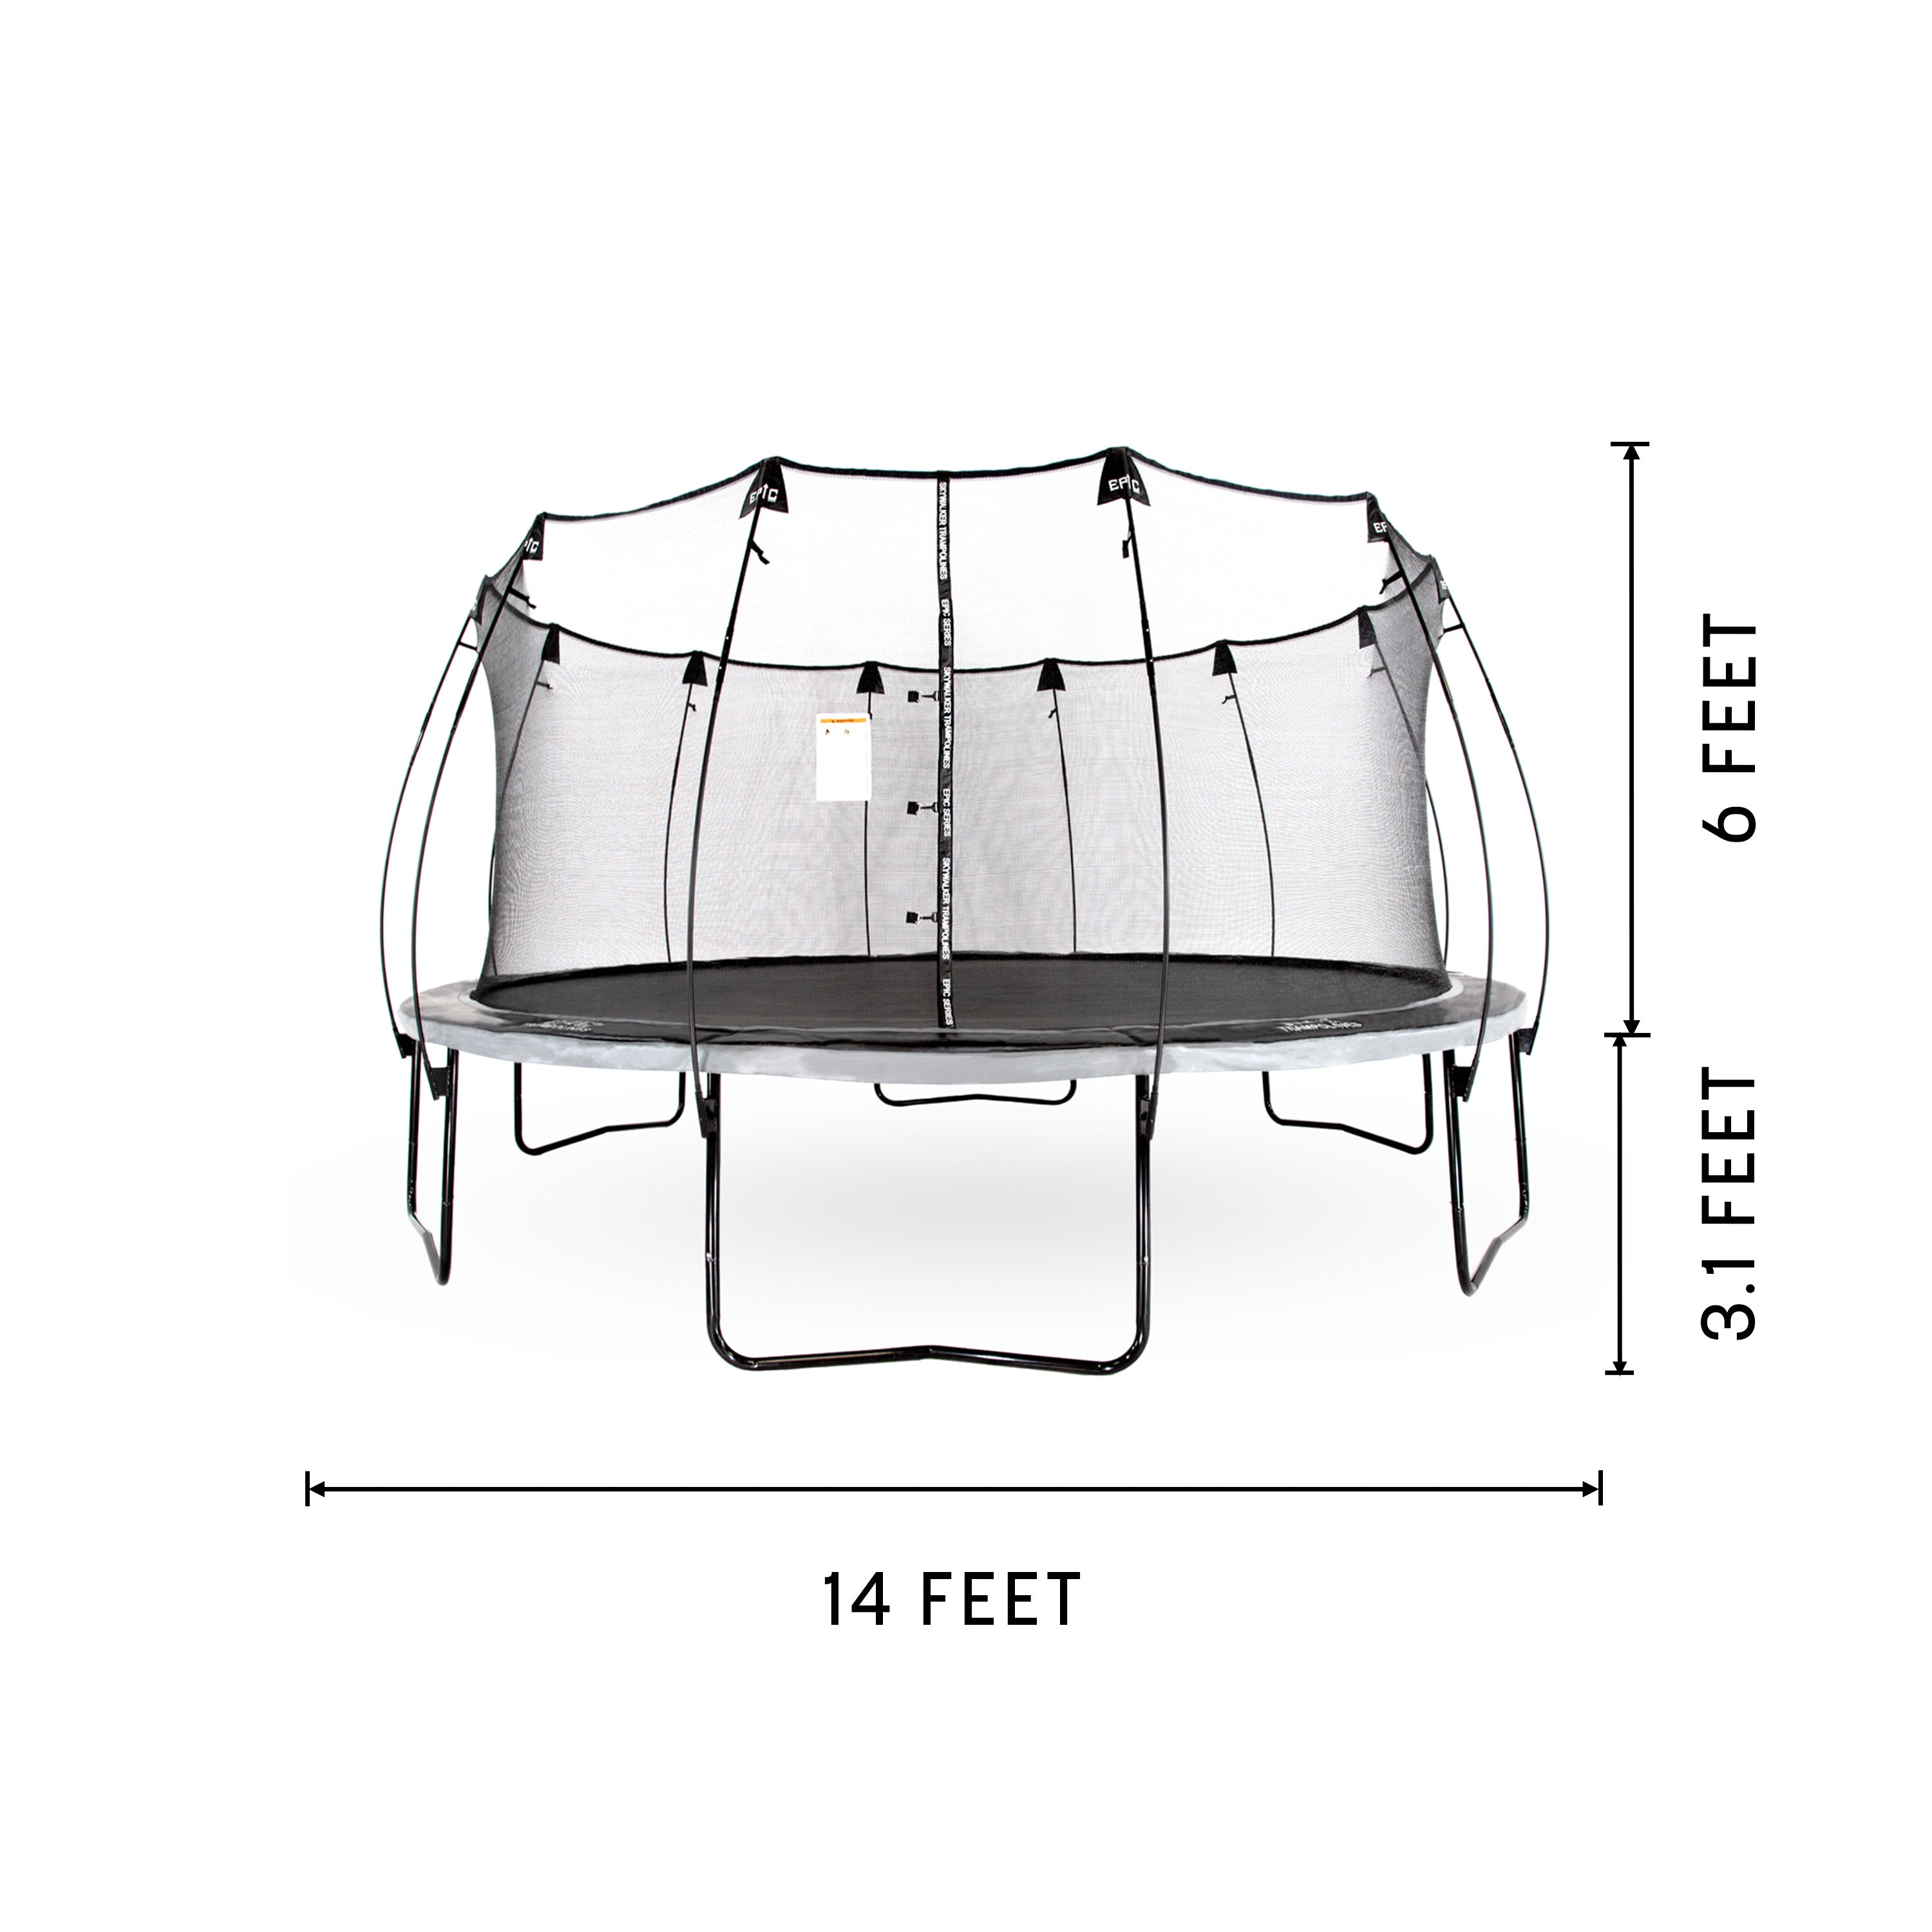 The trampoline is 14 feet wide, 3.1 feet tall from ground to frame, and 6 feet tall from frame to top of enclosure. 